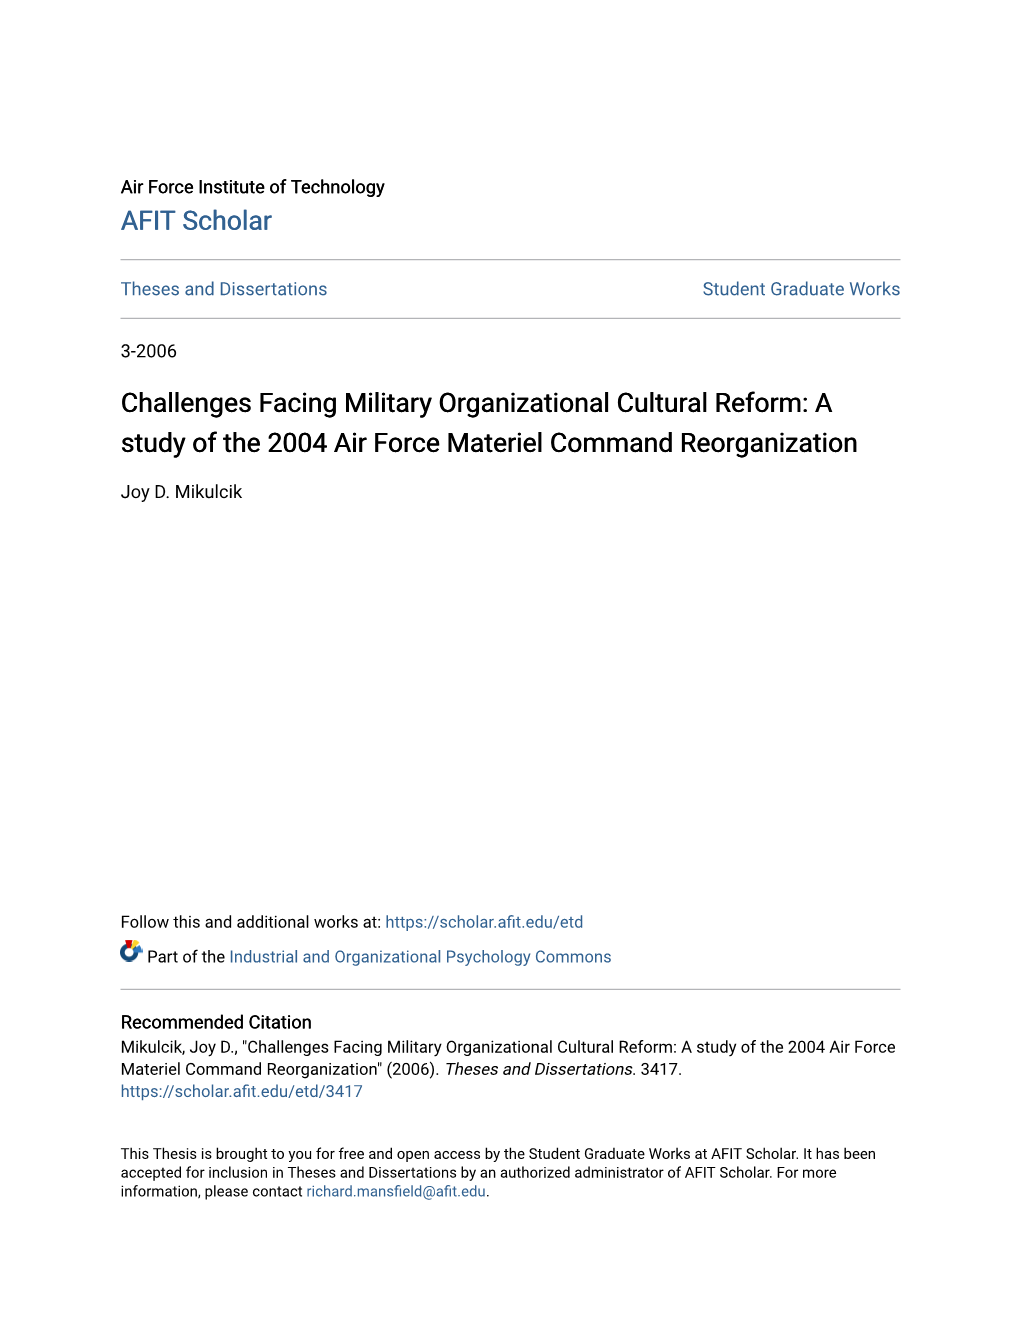 Challenges Facing Military Organizational Cultural Reform: a Study of the 2004 Air Force Materiel Command Reorganization